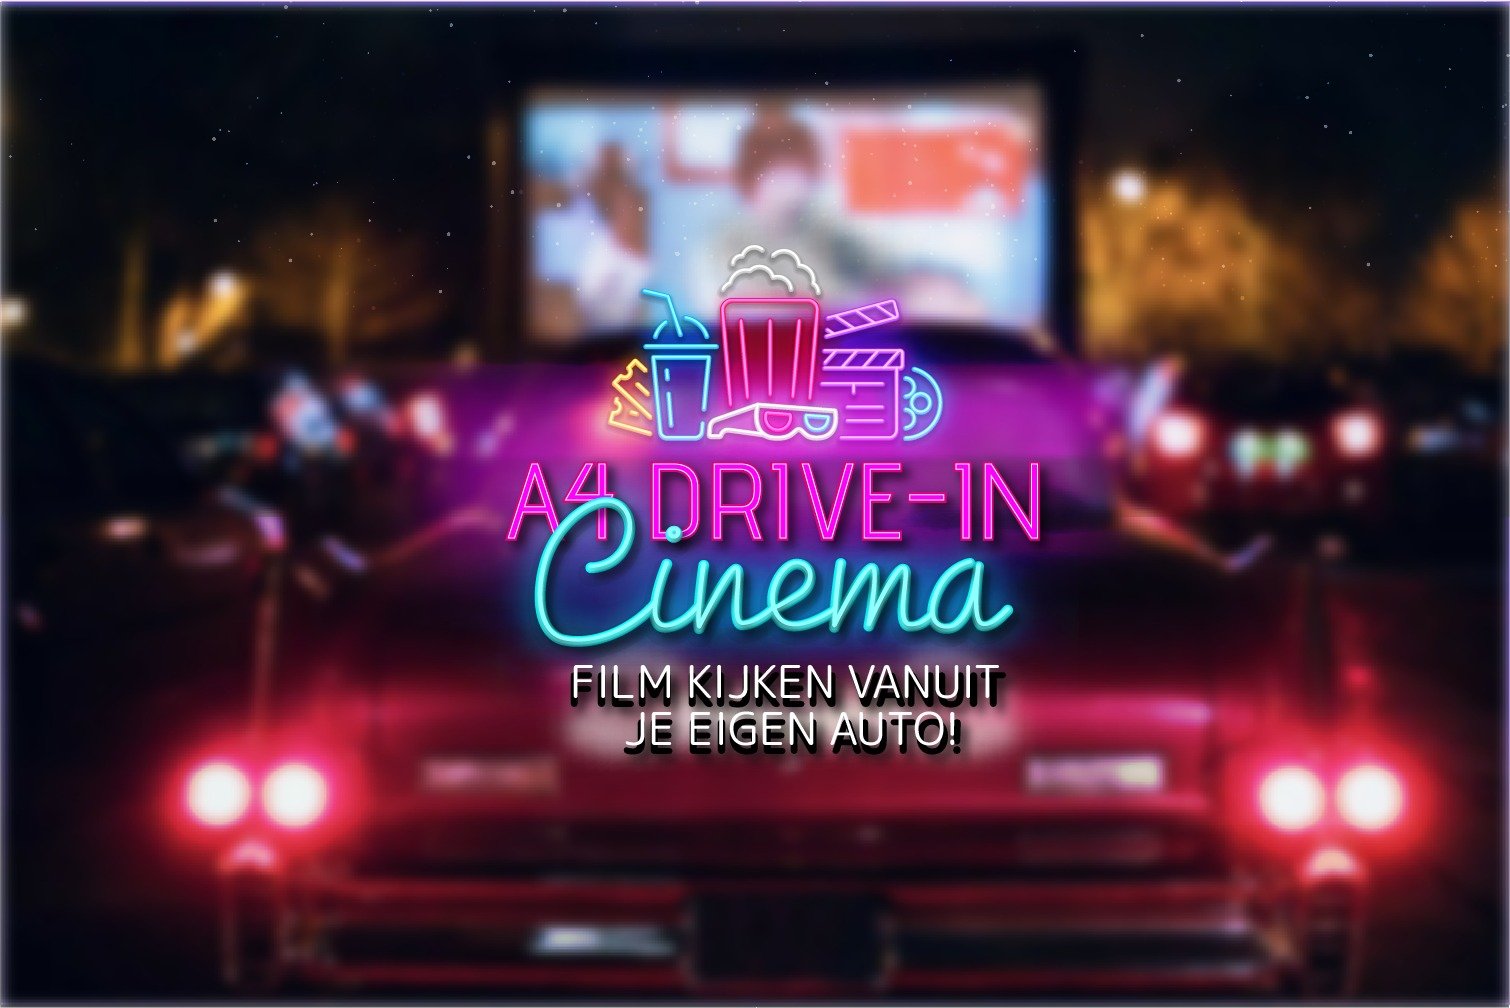 Drive-in bioscoop: Saterday Night Fever